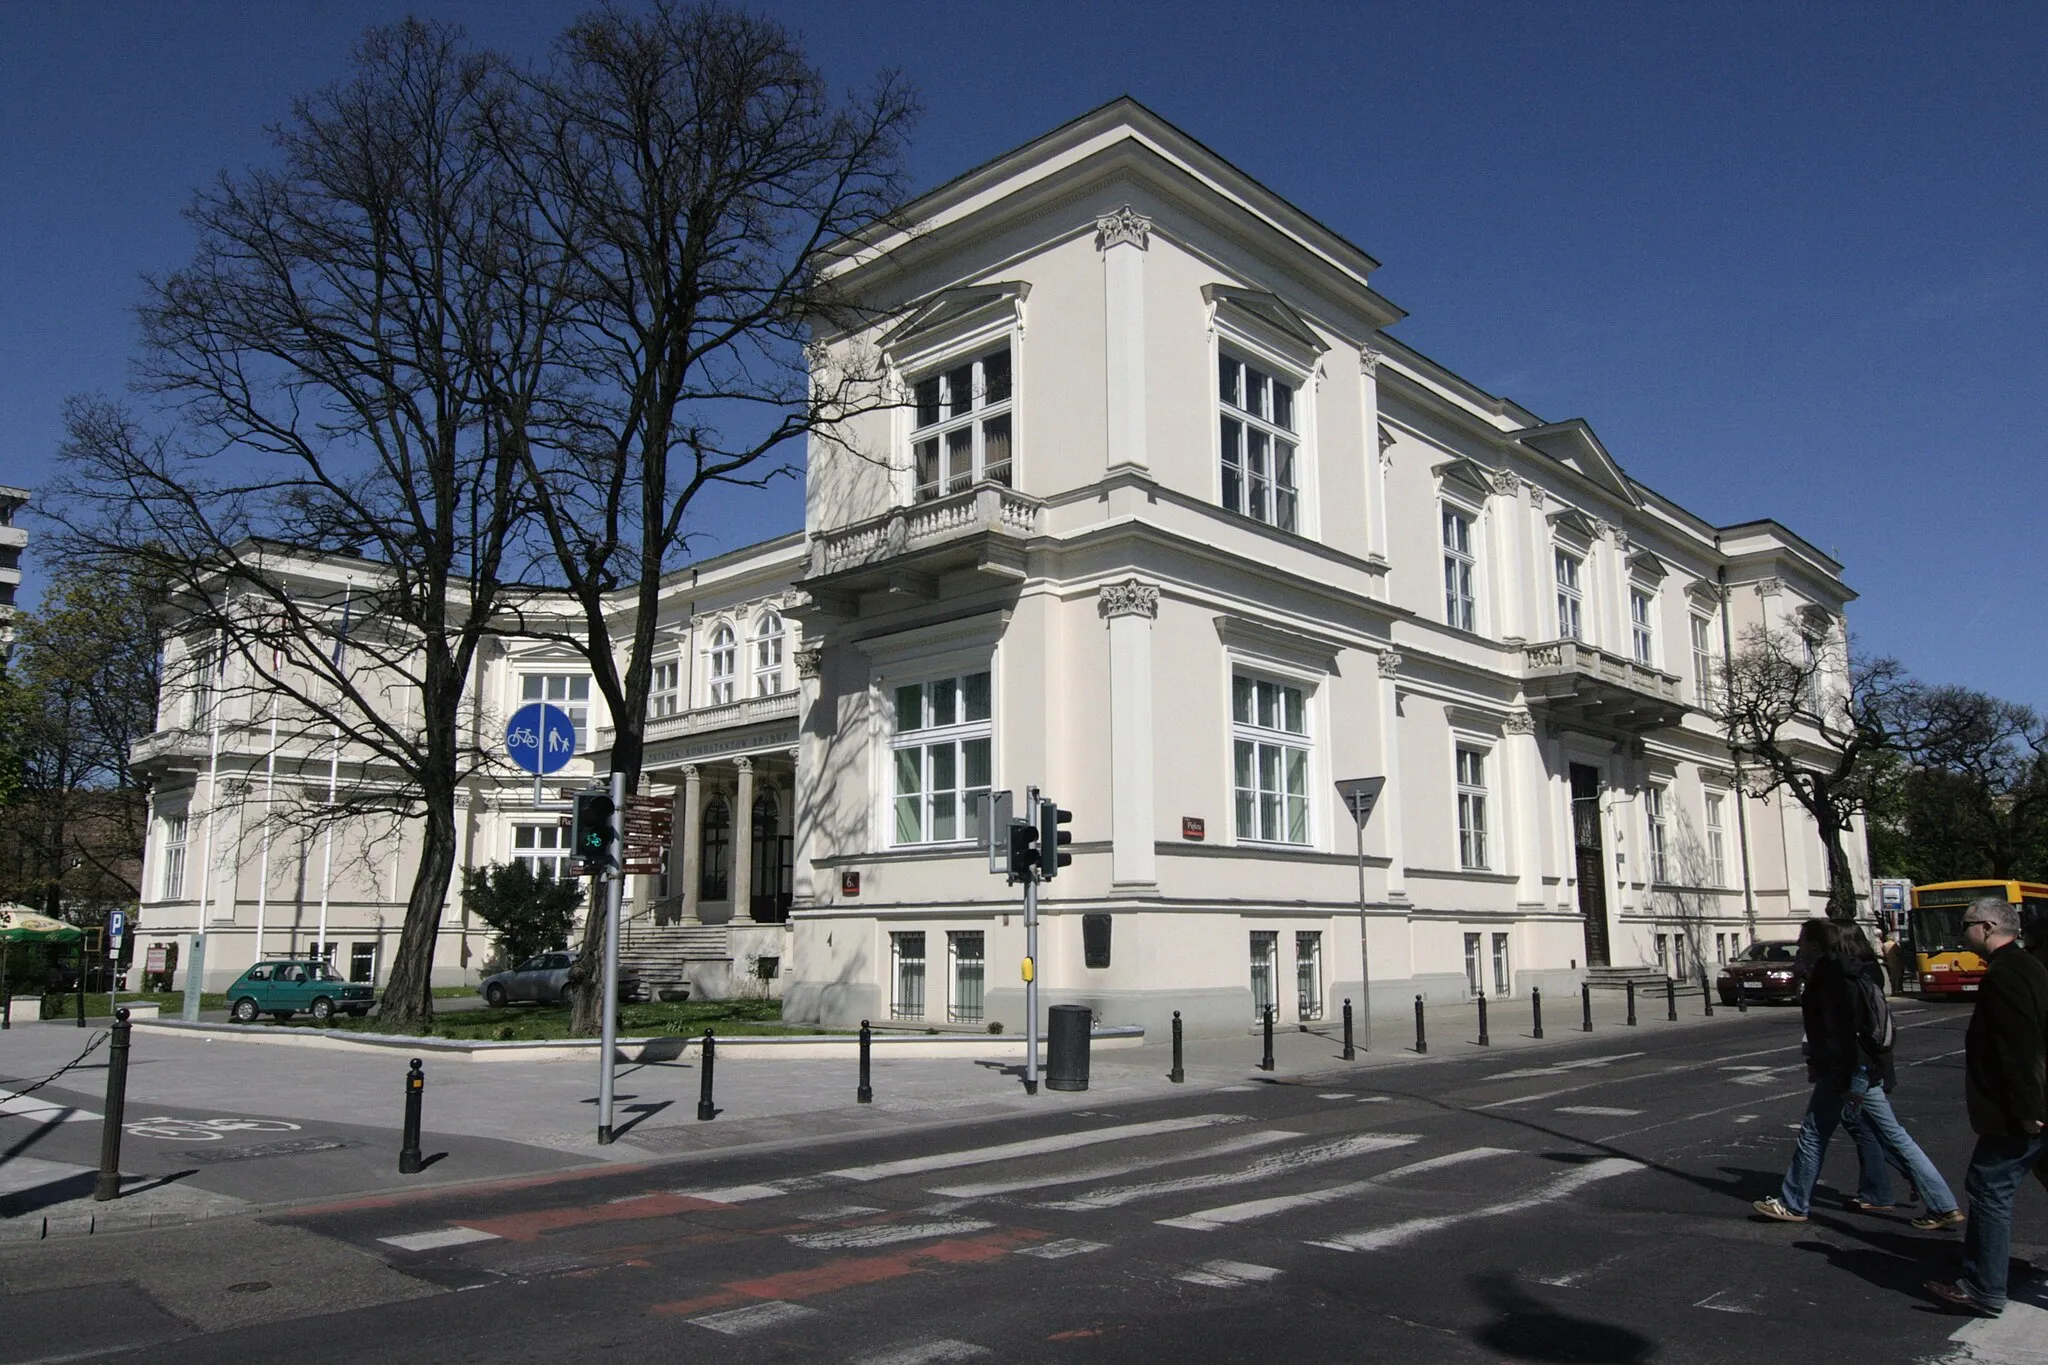 Photo showing: Rembielinski's Palace - Headquarters of Polish Society of War Veterans at Aleje Ujazdowskie 6a in Warsaw